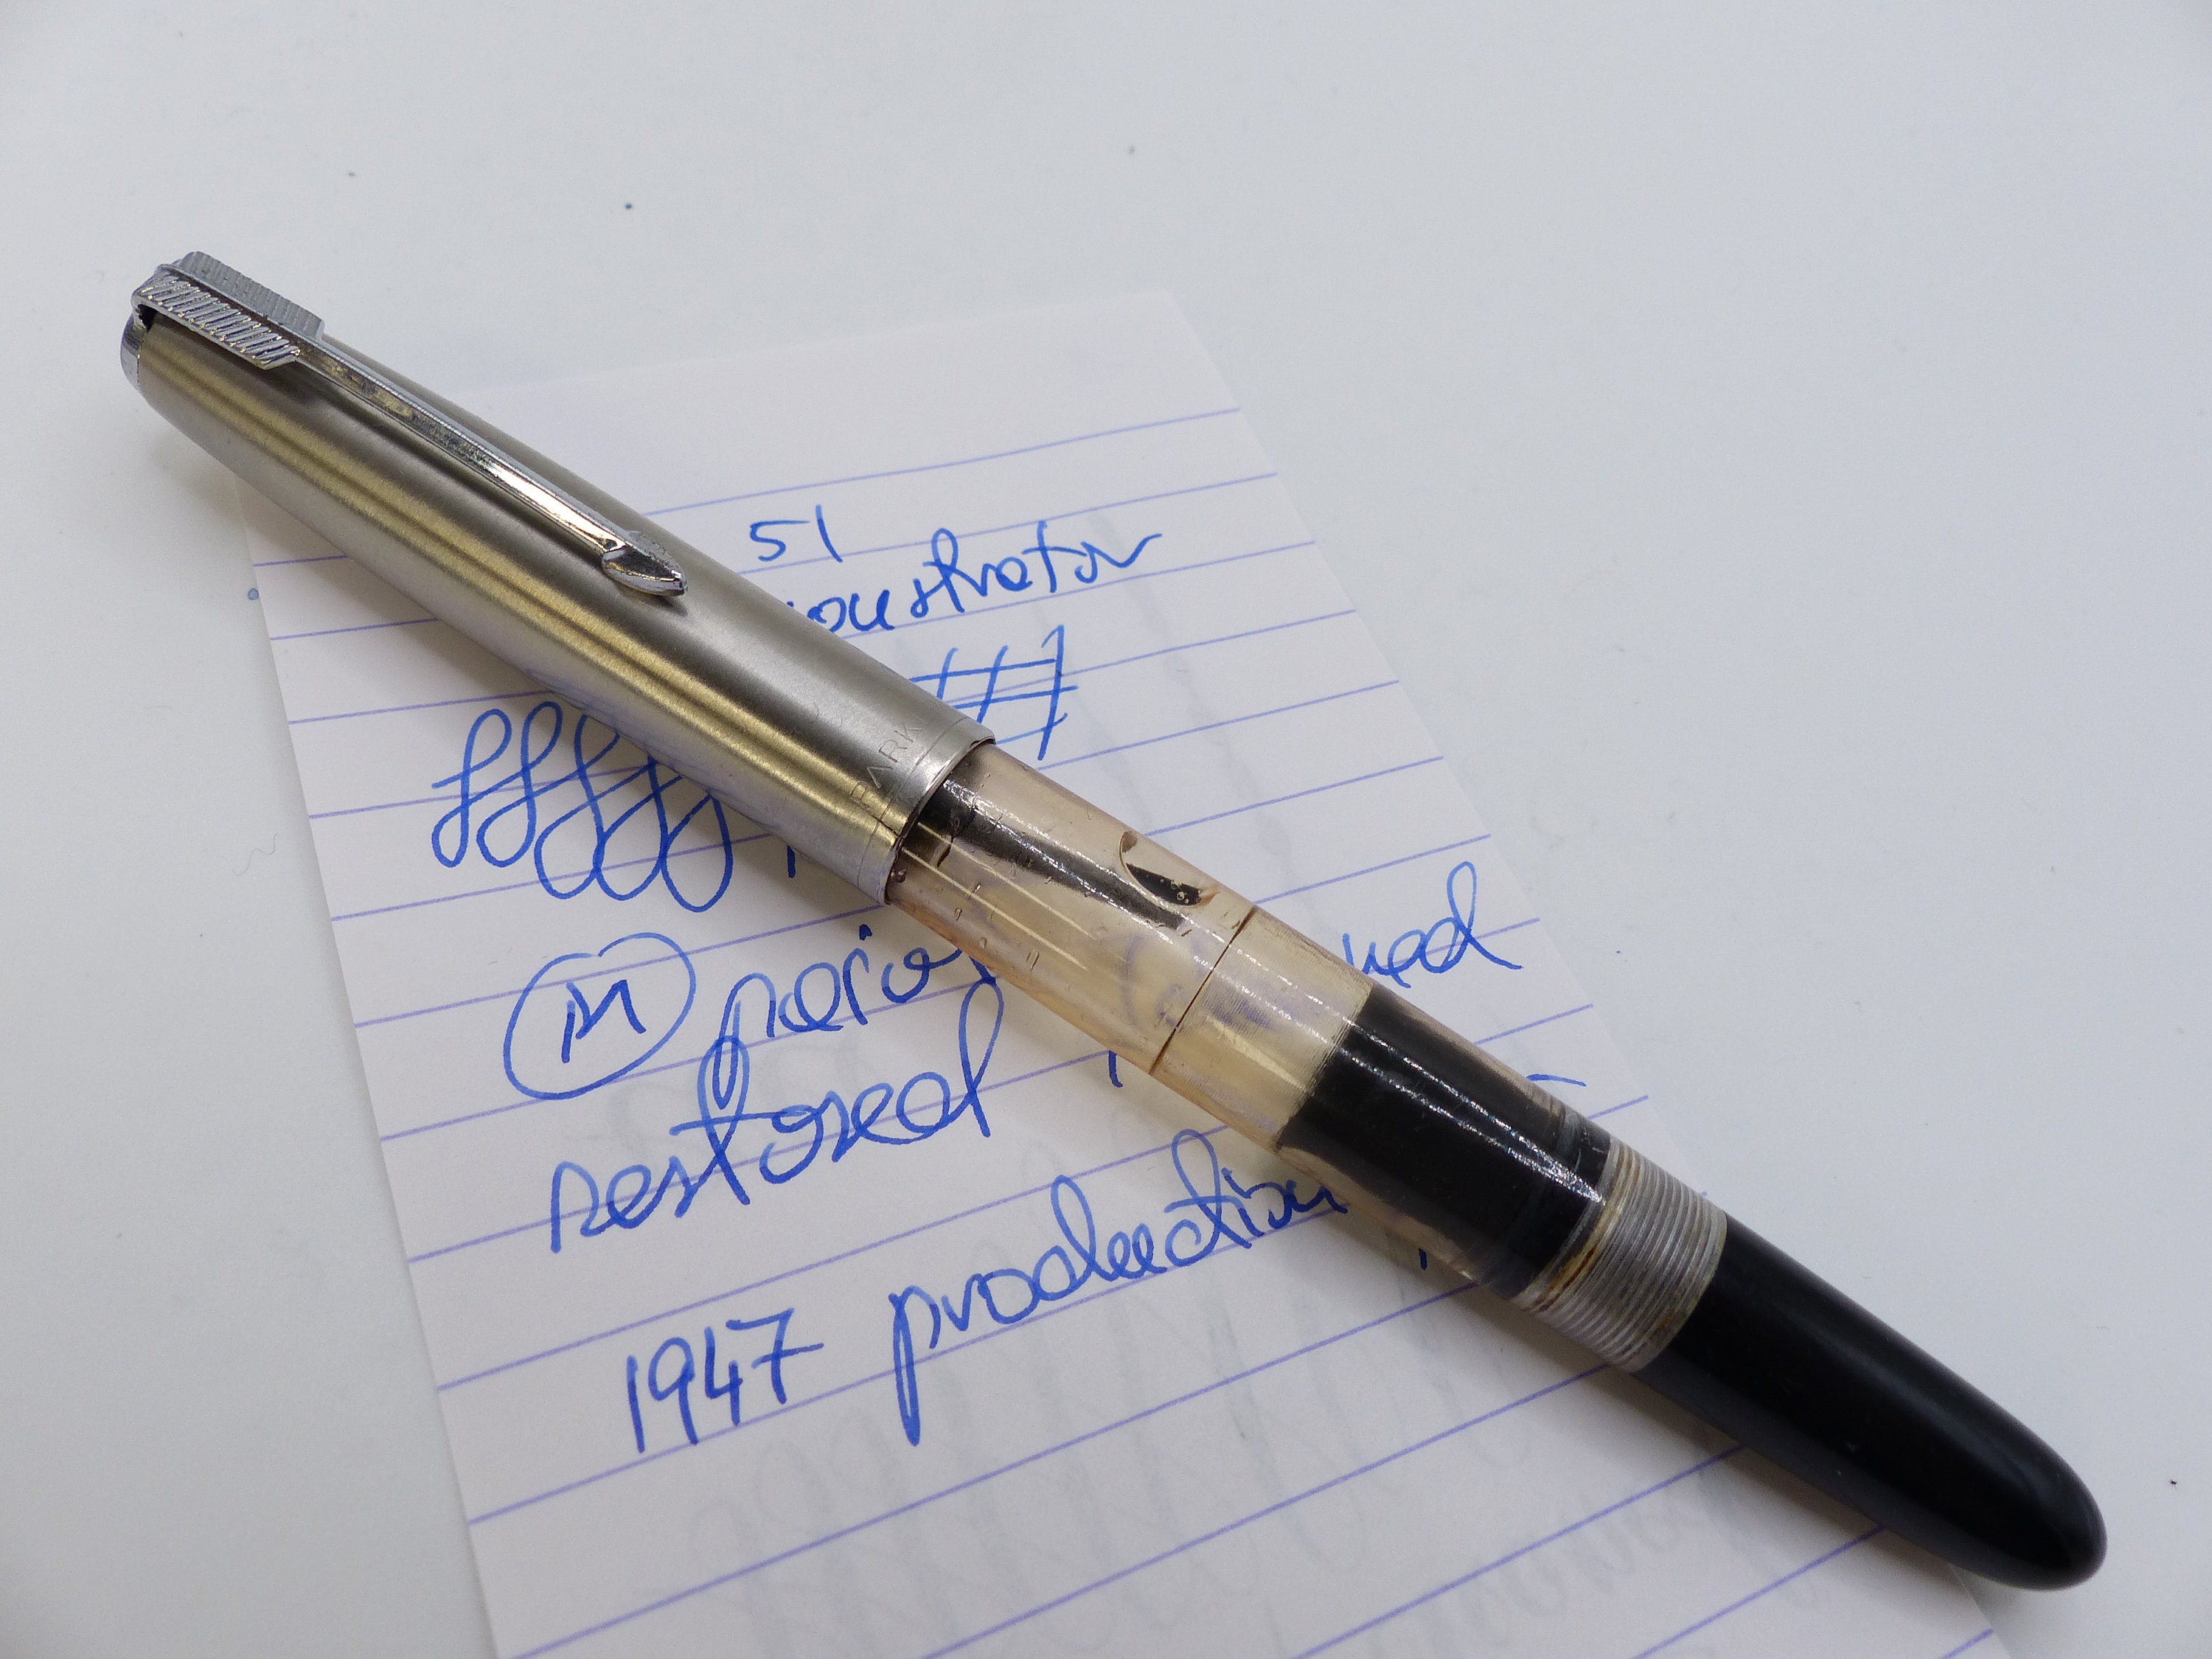 The Grey Parker 51'47 – Chronicles of a Fountain Pen